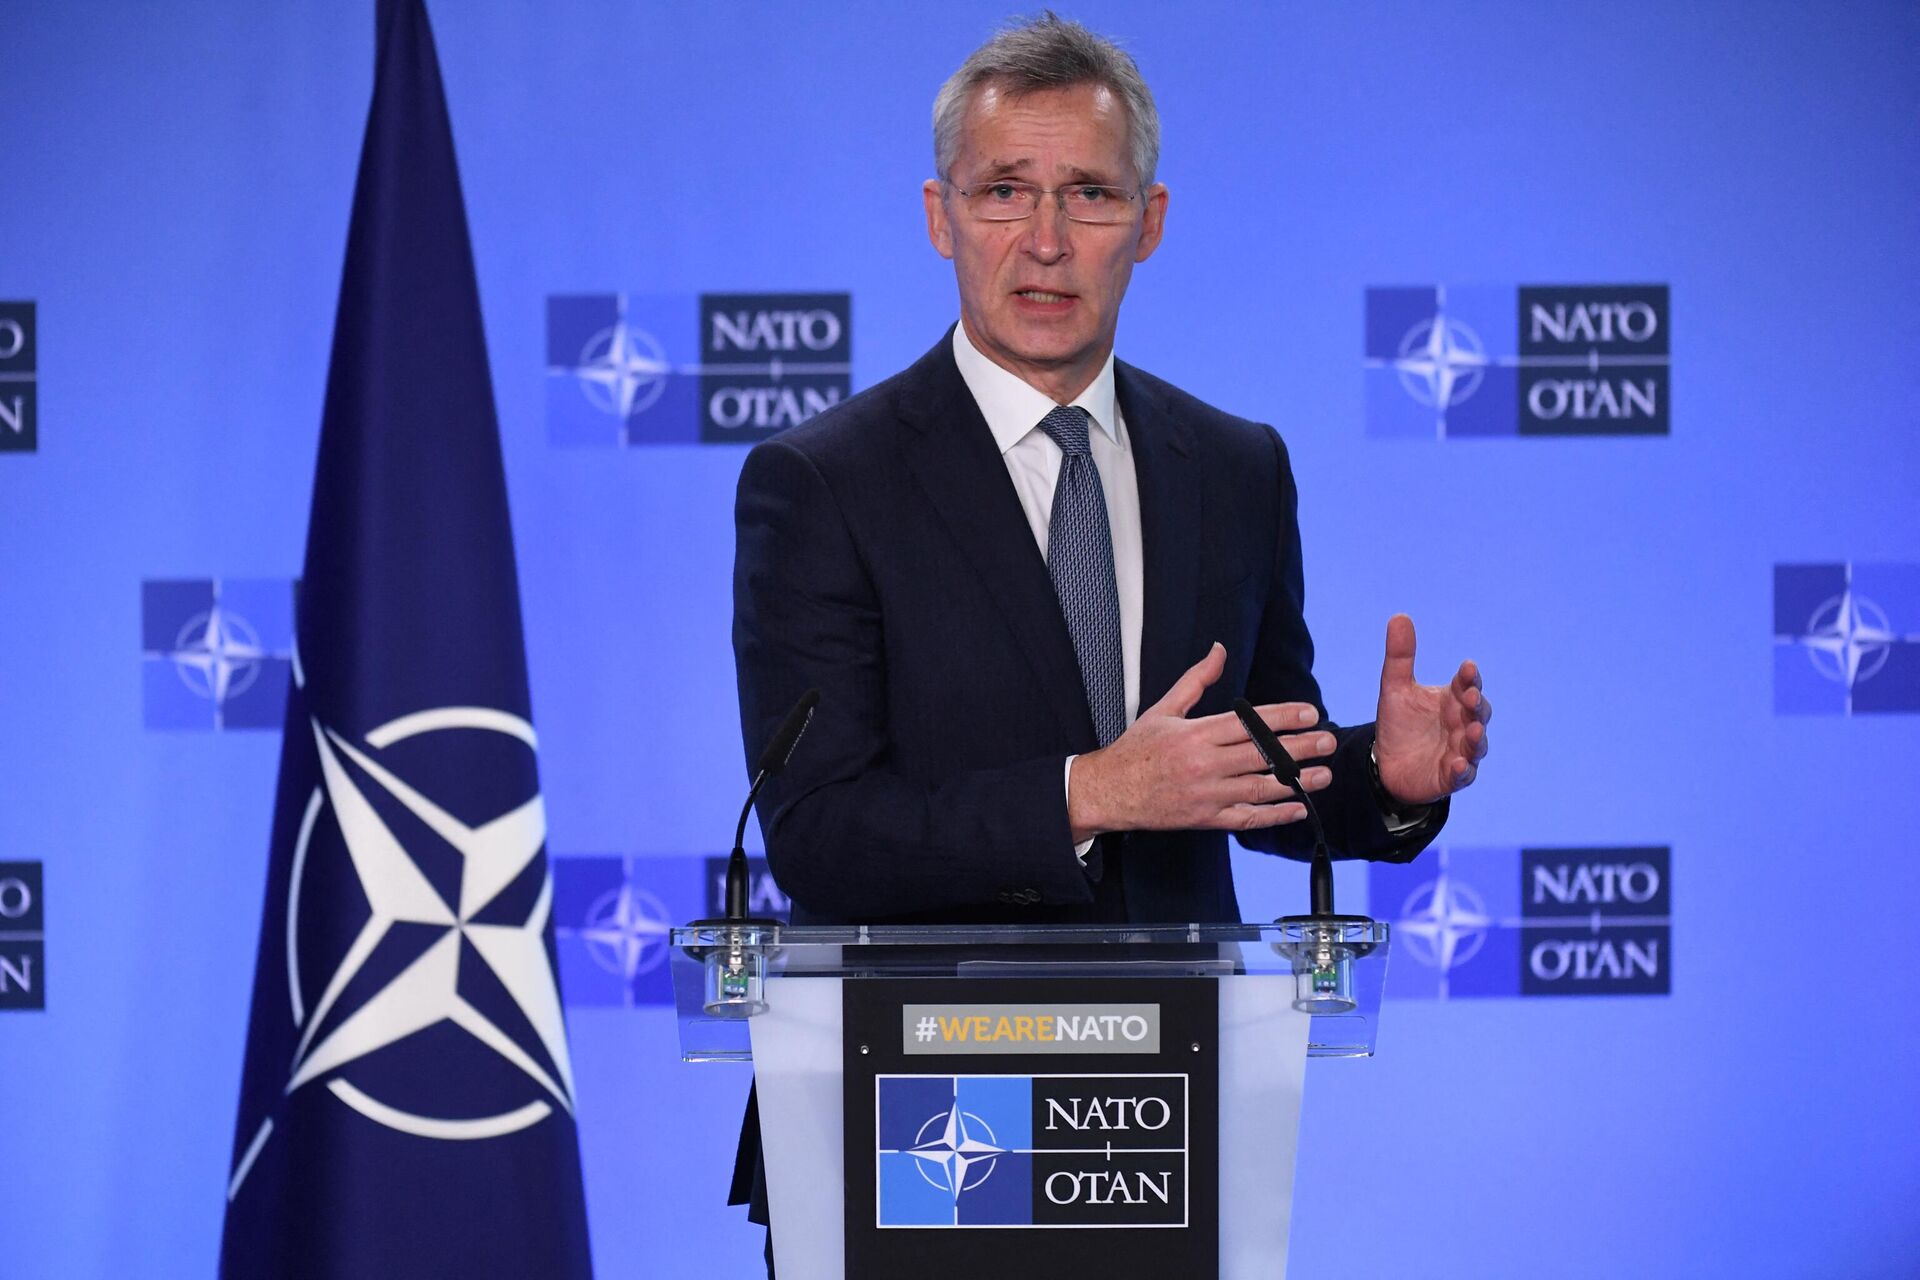 NATO Secretary General Jens Stoltenberg gestures as he speaks during a joint press conference with Ukraine's Deputy Prime Minister for European and Euro-Atlantic Integration after their bilateral meeting at the NATO headquarters in Brussels on January 10, 2022.  - Sputnik International, 1920, 29.11.2022